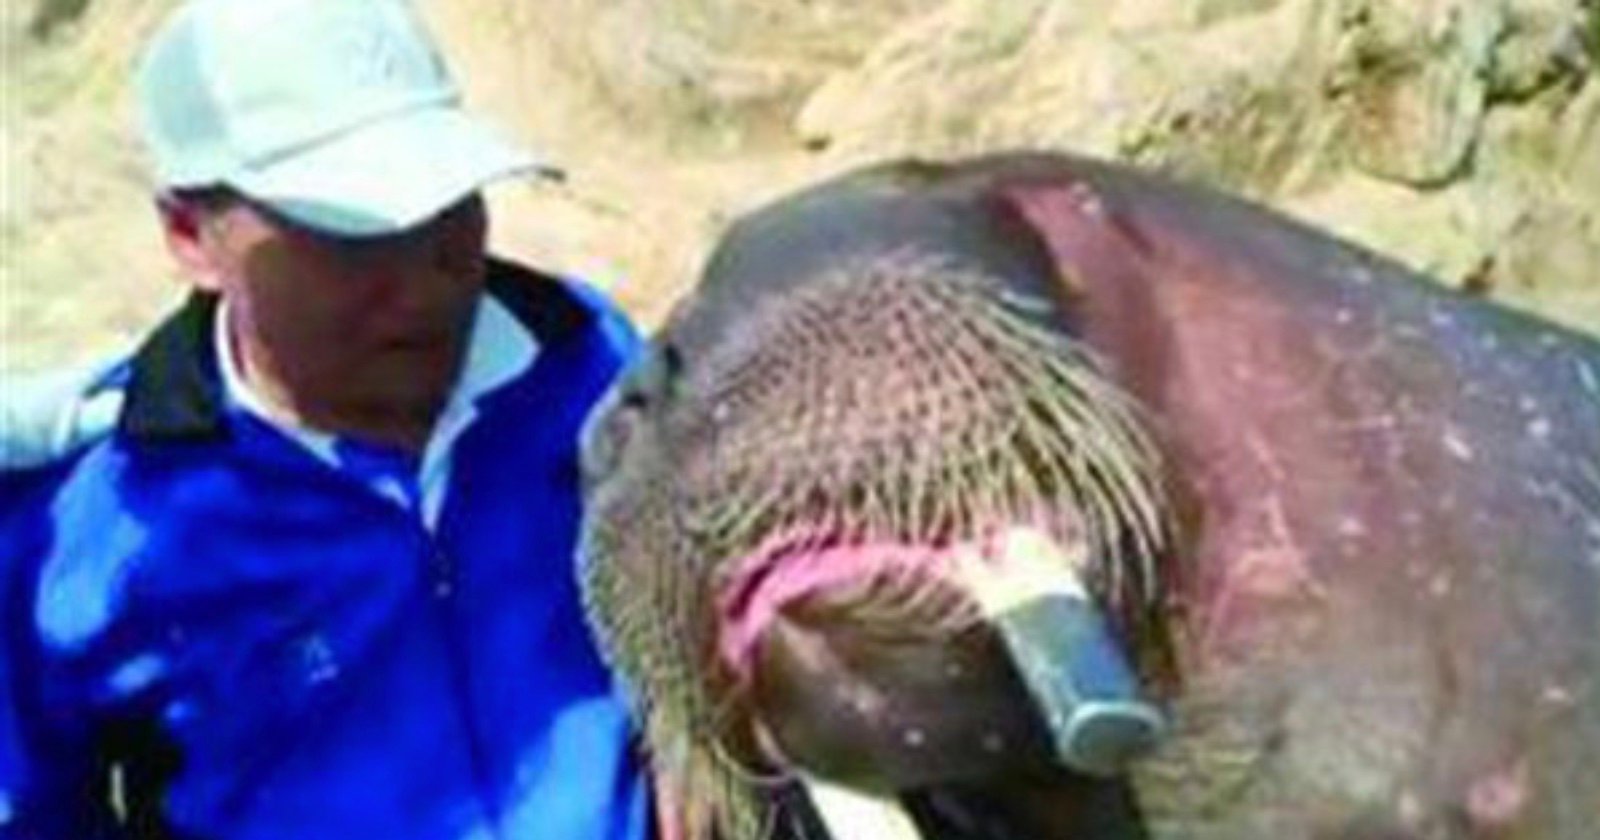 Story of Man Who Was Killed by Walrus He Was Taking Selfie With Resurfaces